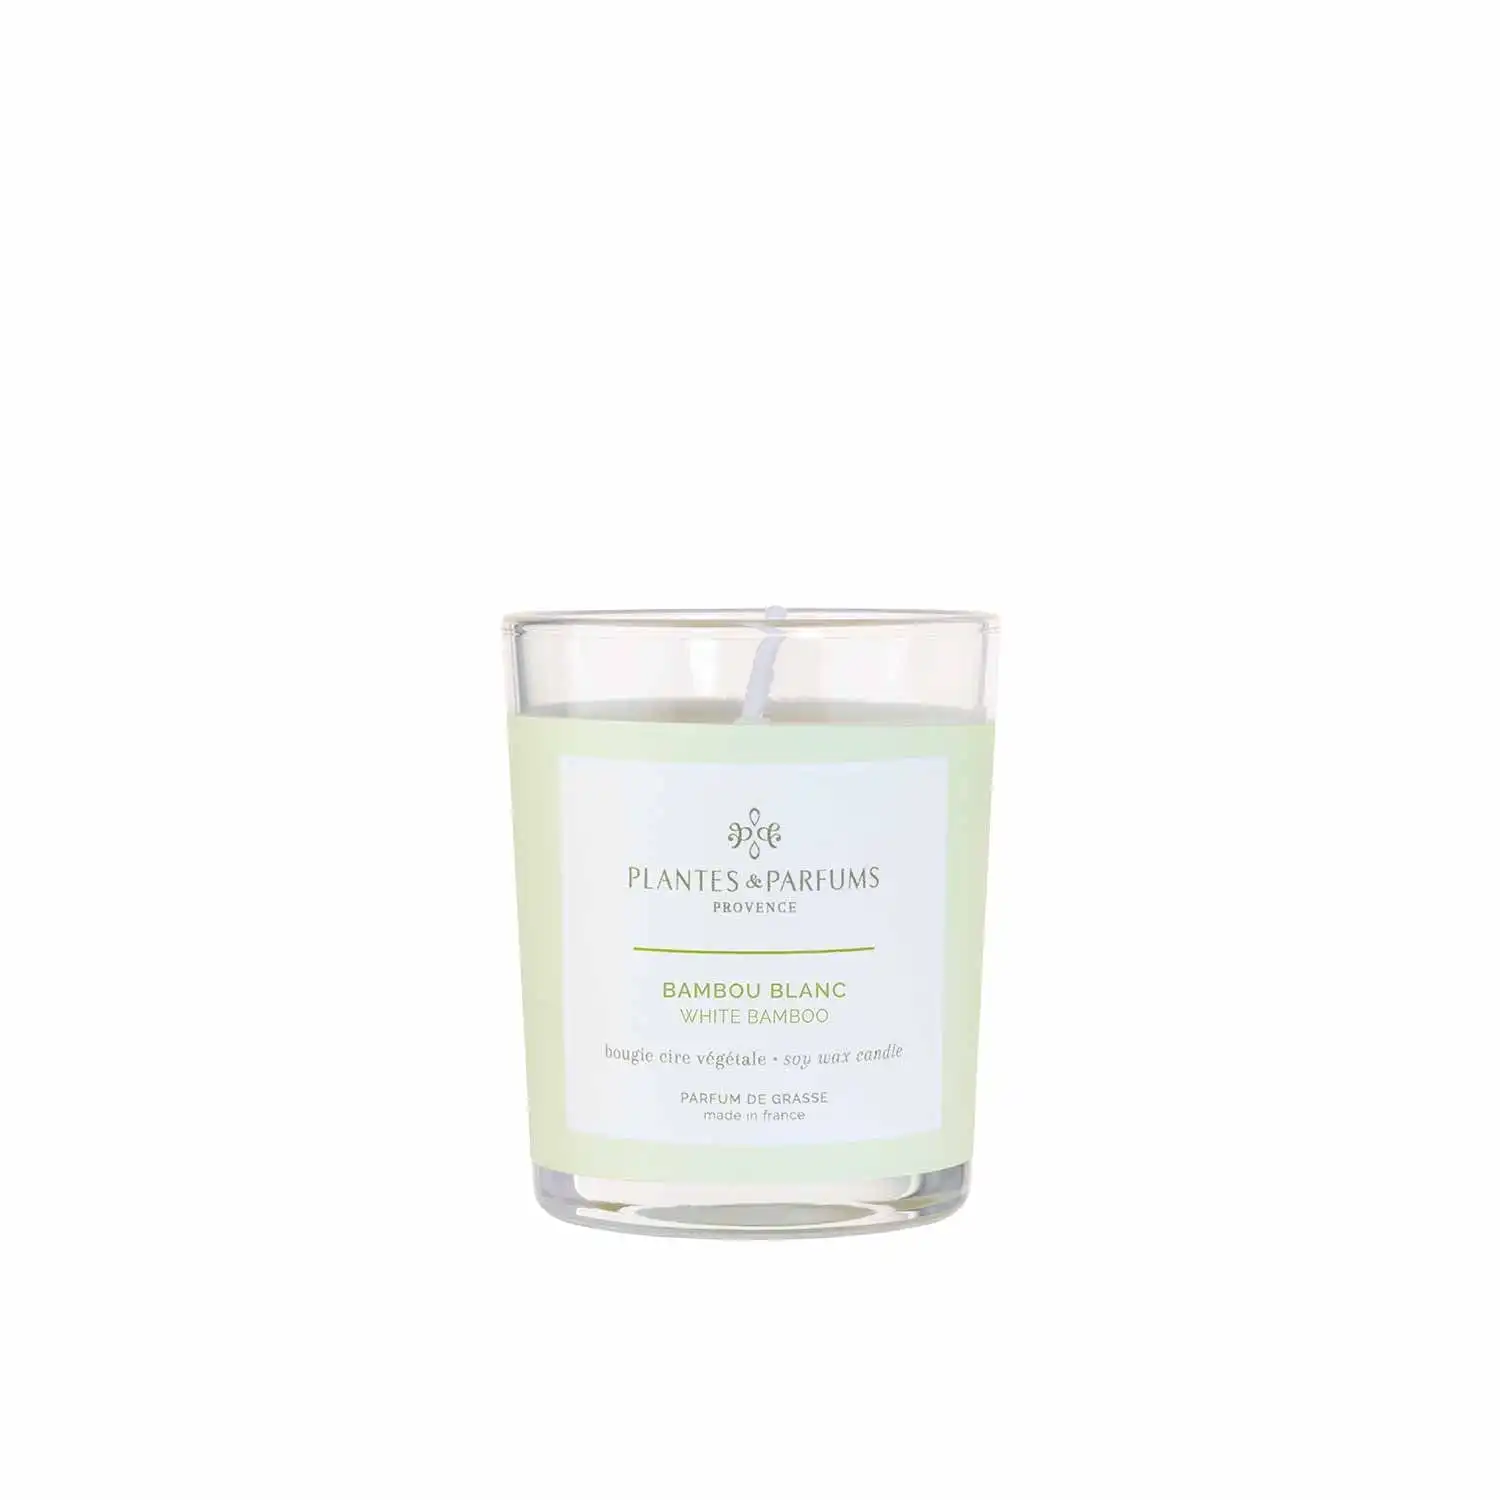 Plantes & Parfums | 75g Handcrafted Perfumed Candle - White Bamboo